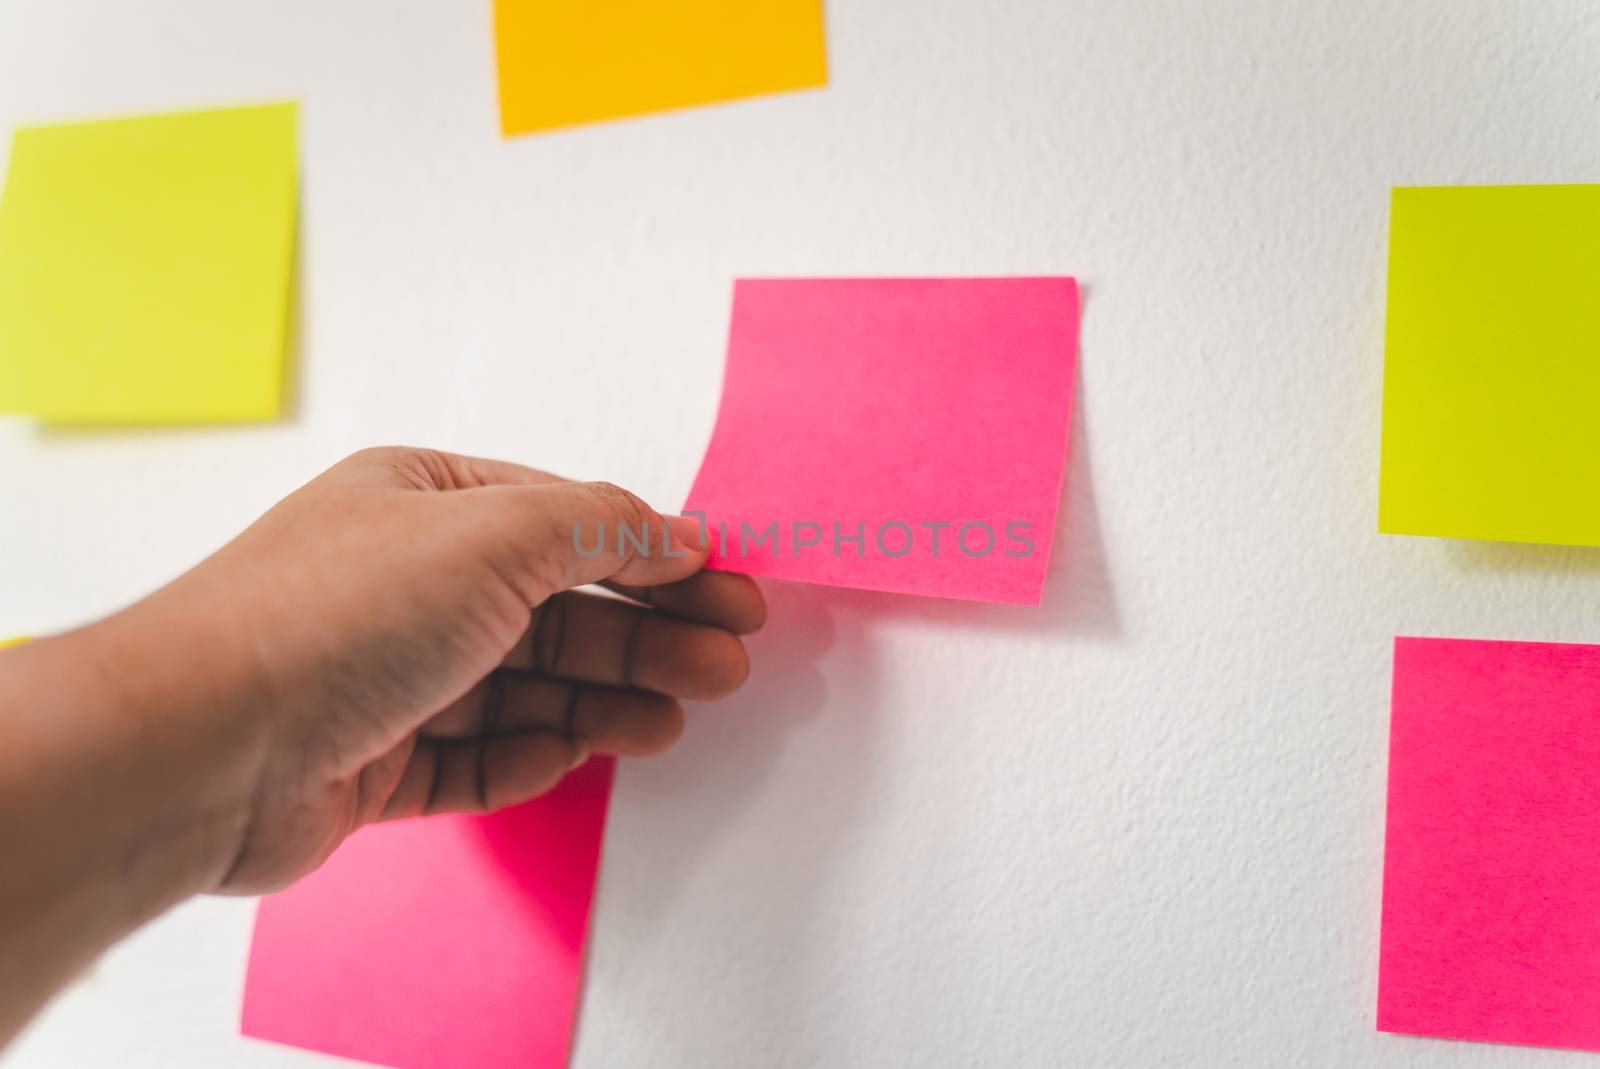 The hand is holding the post it notes attached to the wall. Conc by photobyphotoboy